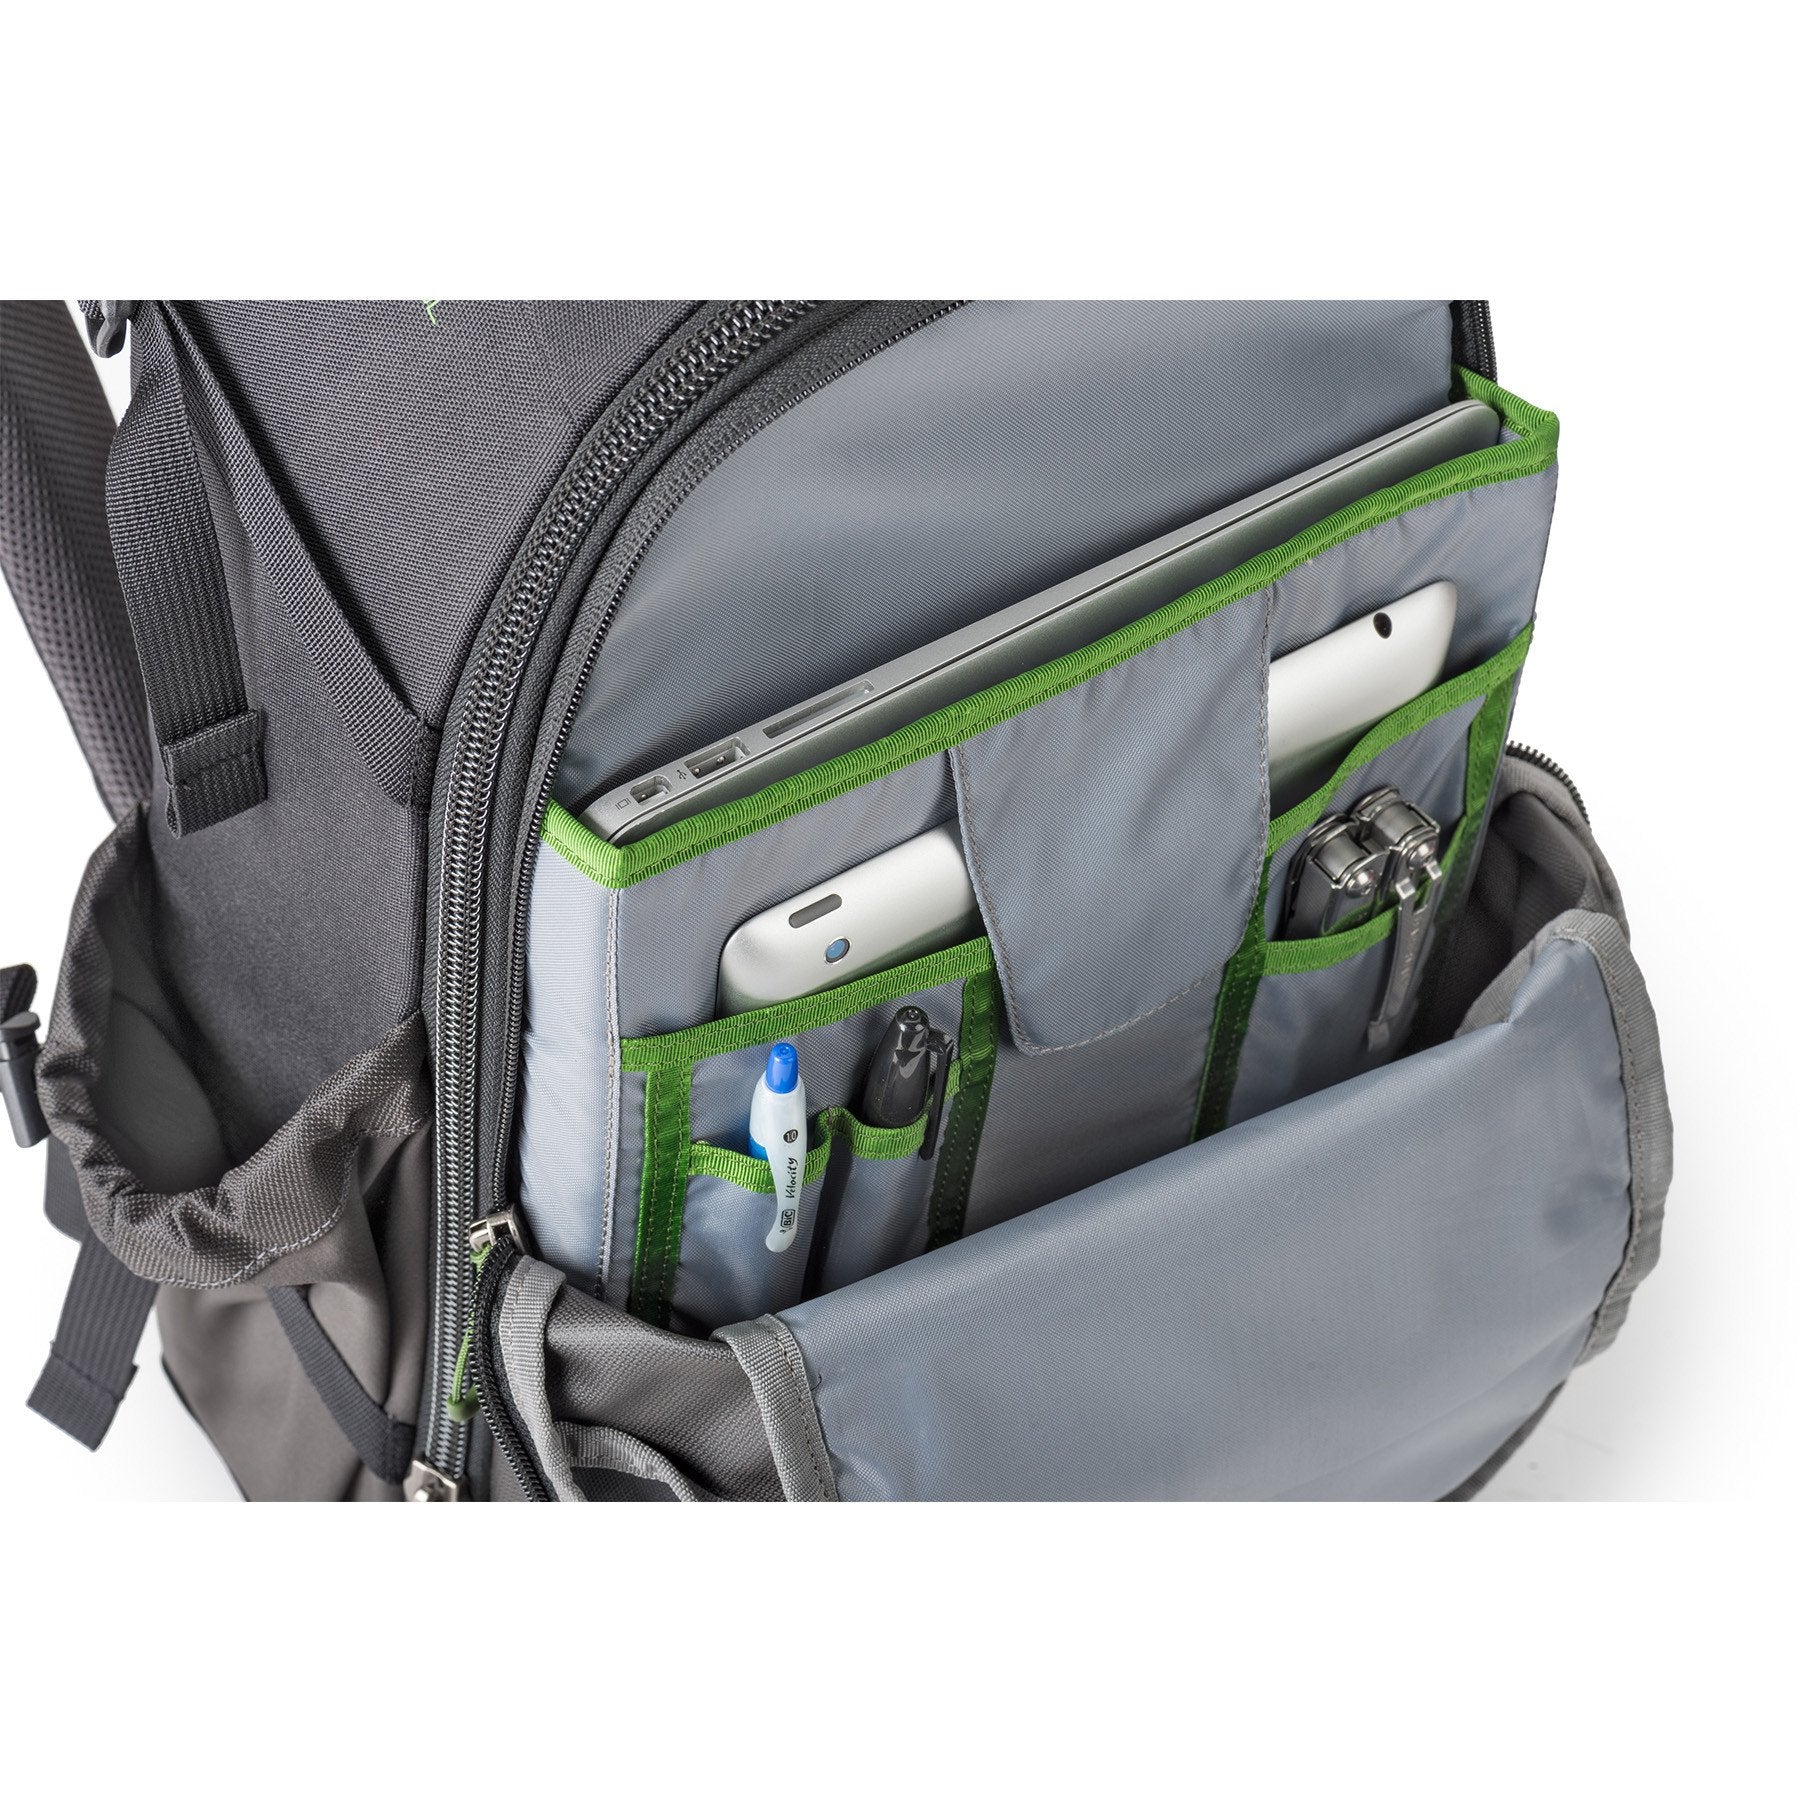 MindShift TrailScape 18L - Dedicated compartment for a 13” laptop and 10” tablet. Organizer pockets for pens, flashlight and business cards